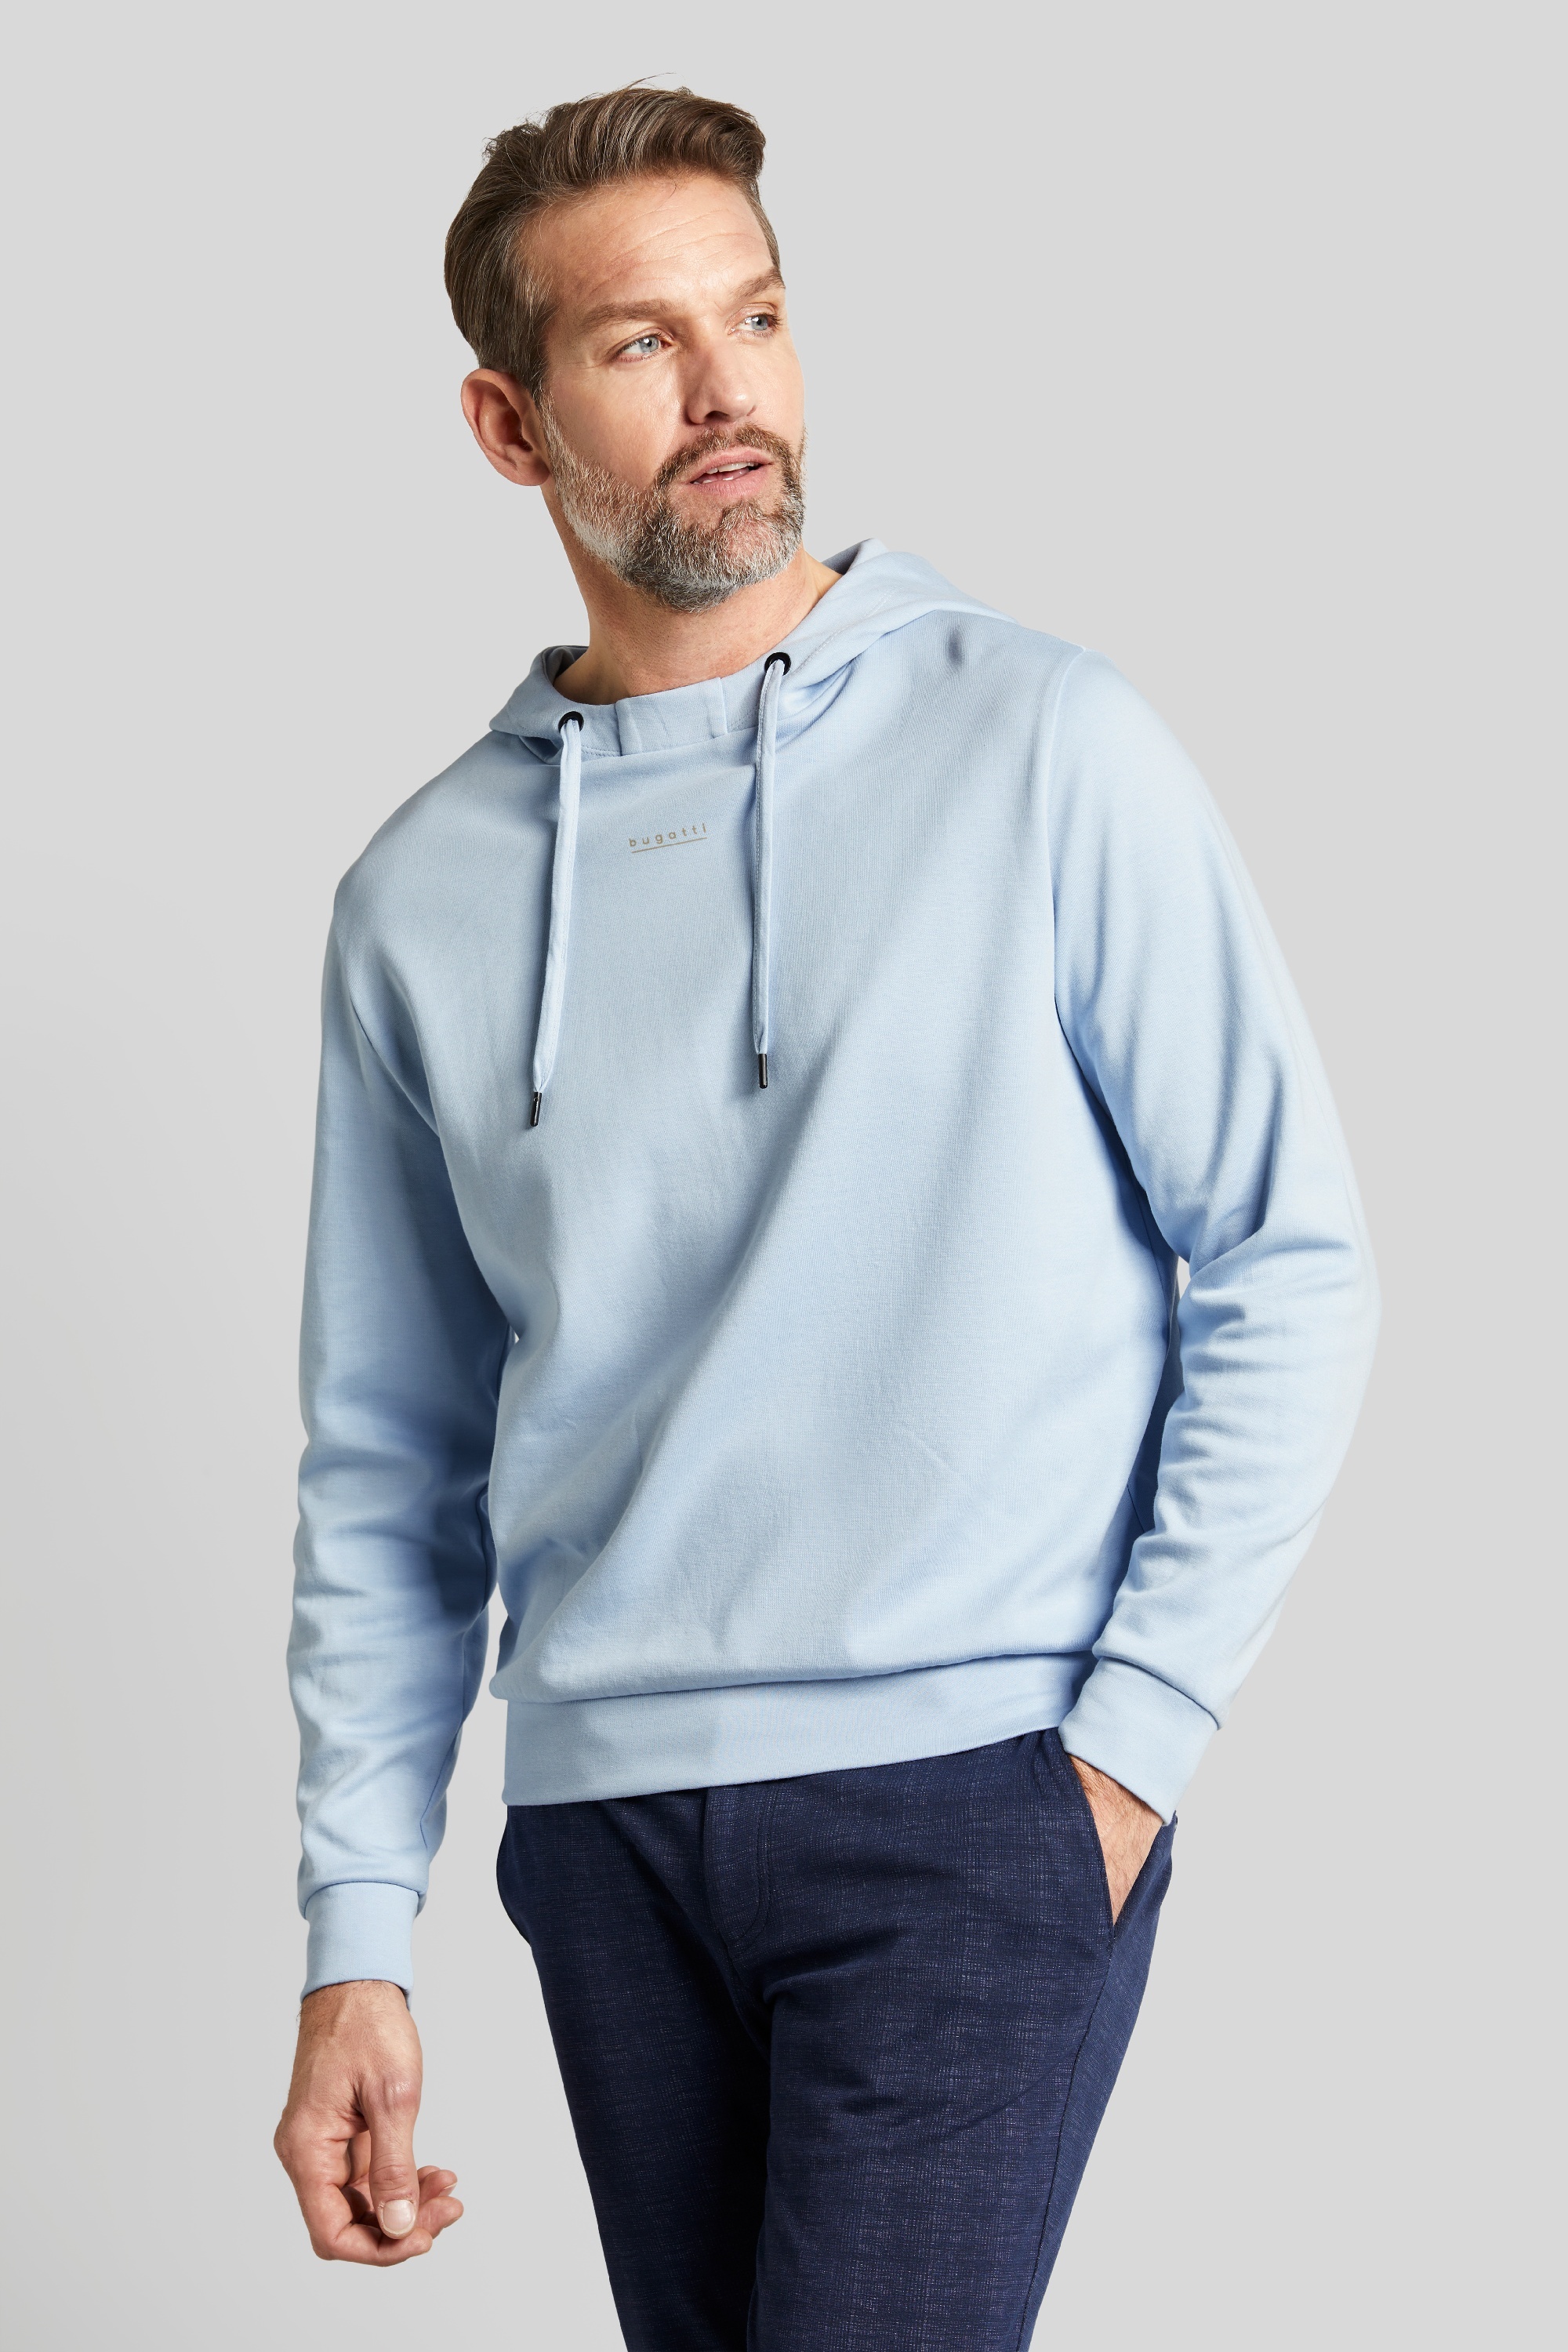 Hooded sweatshirt With small logo print in gold in light blue | bugatti